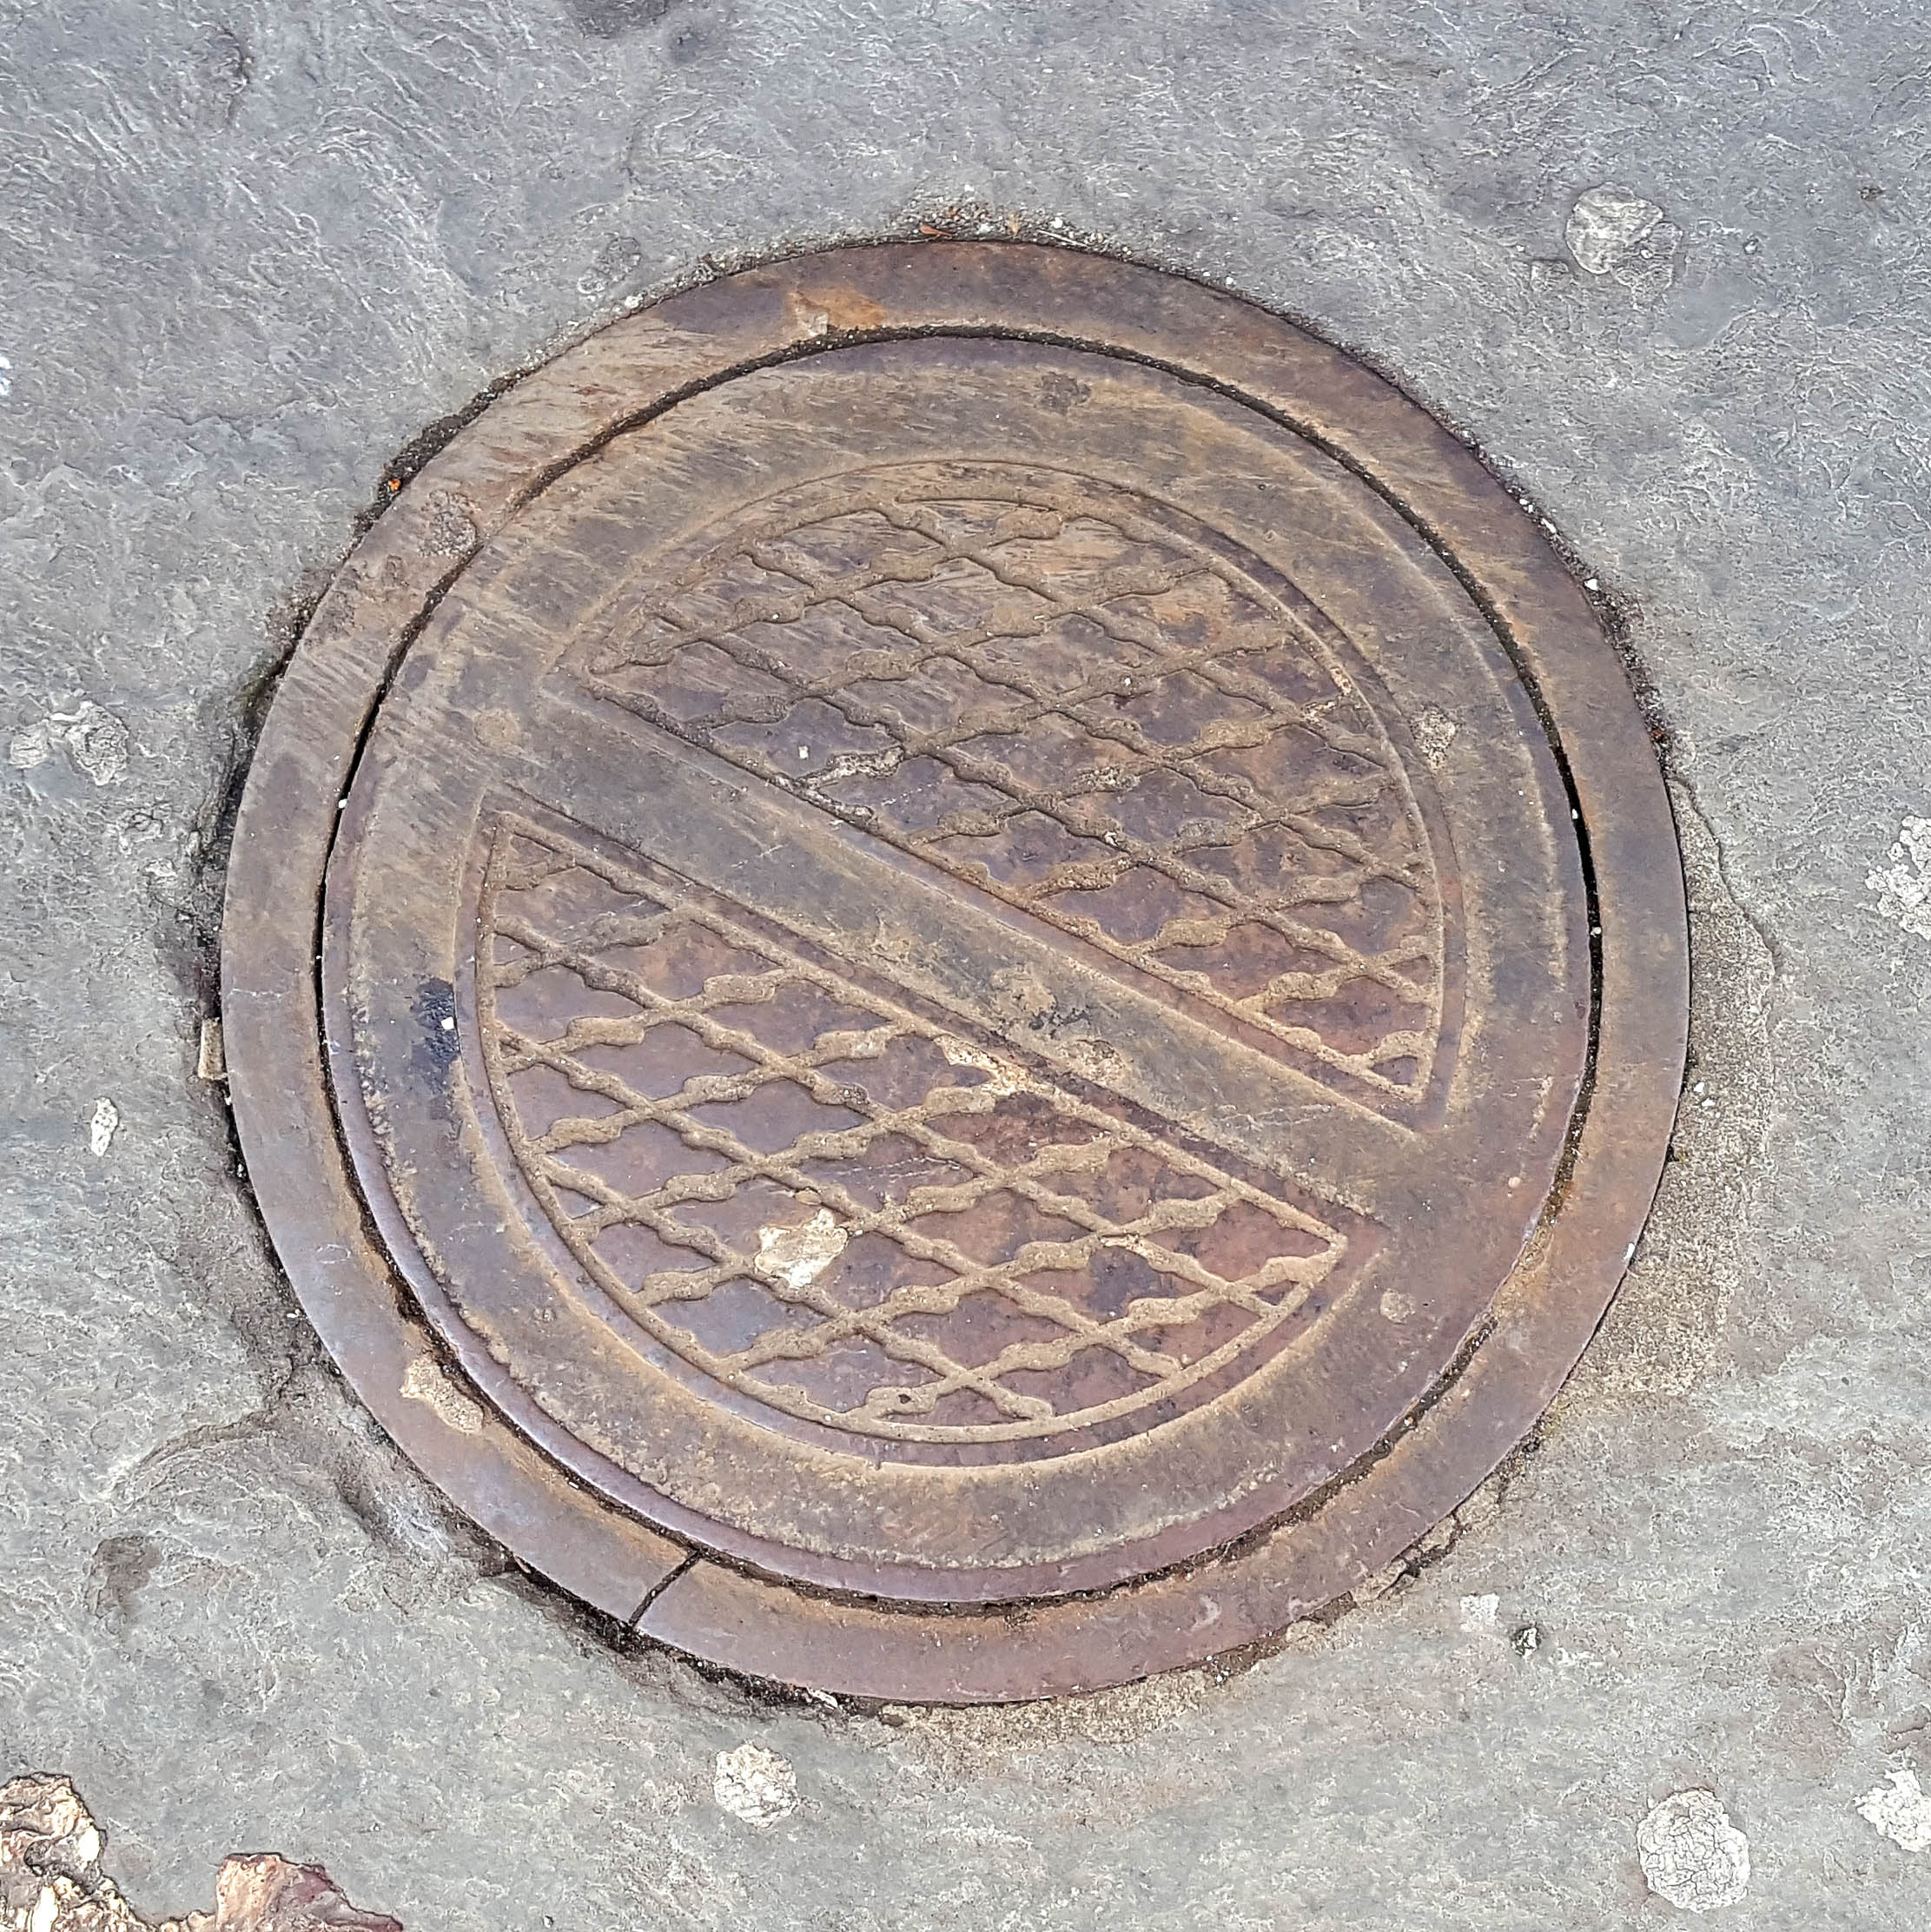 Manhole Cover, London - Cast iron with criss cross patterns